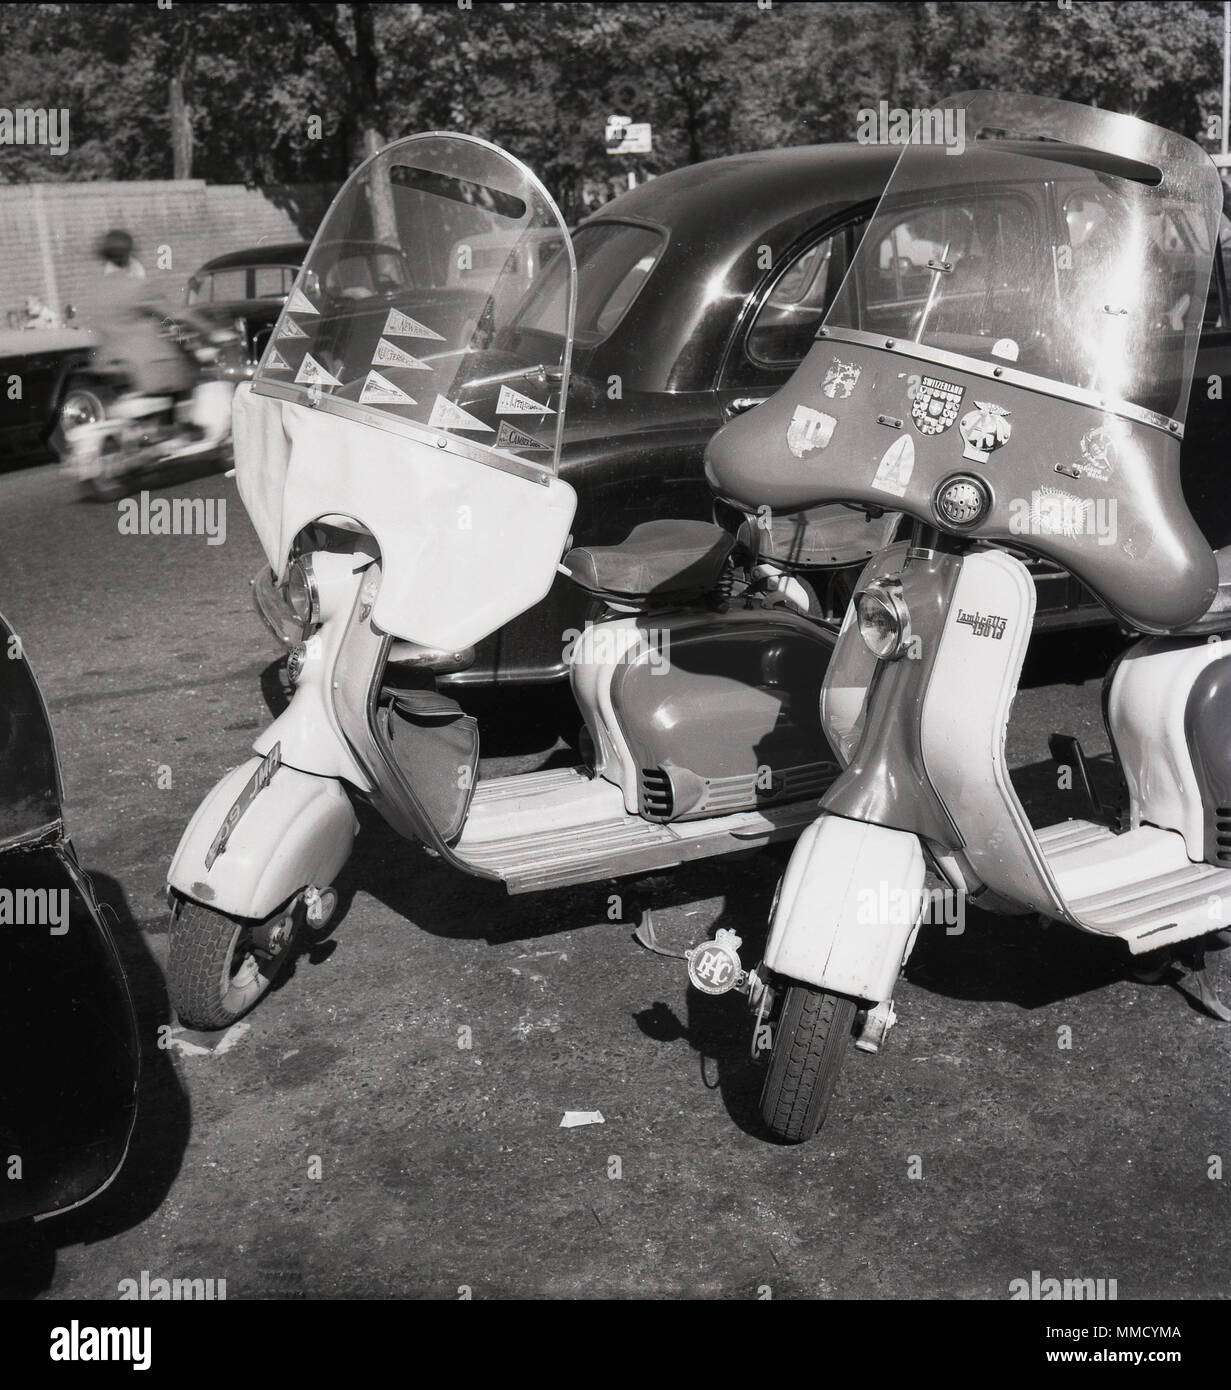 1960s, two scooters with fairings, Italian-made Lambrettas, parked in a street in London, England, UK. The Lambretta 1501d has both RAC and AA badges and stickers on the fairing, suggesting it has been well used for overseas touring. Stock Photo